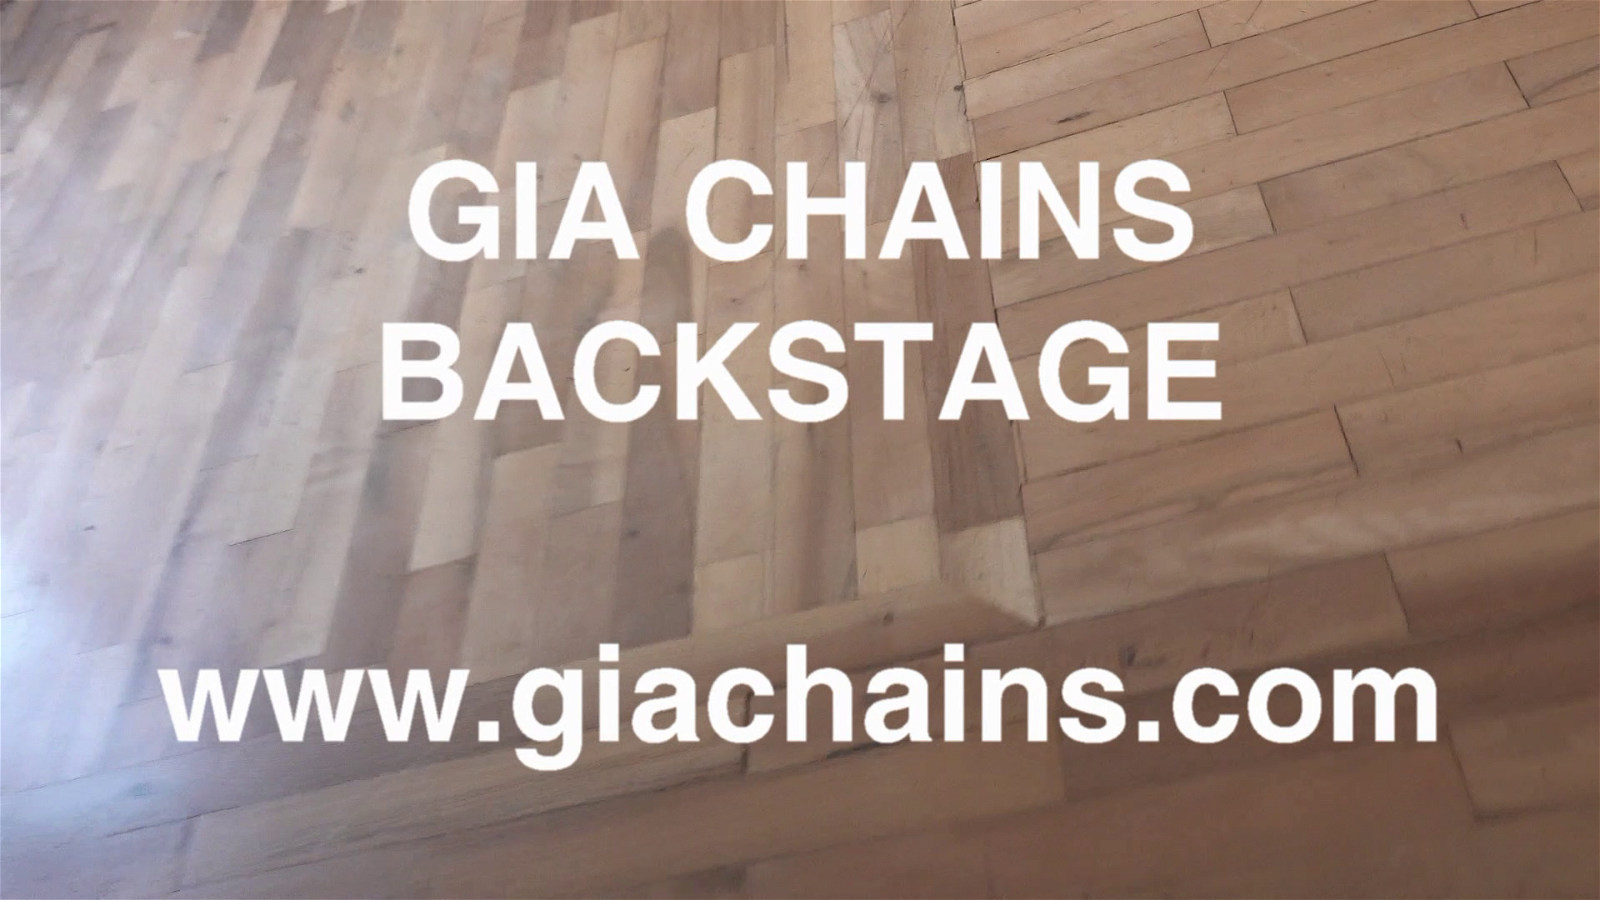 Video post by Gia Chains